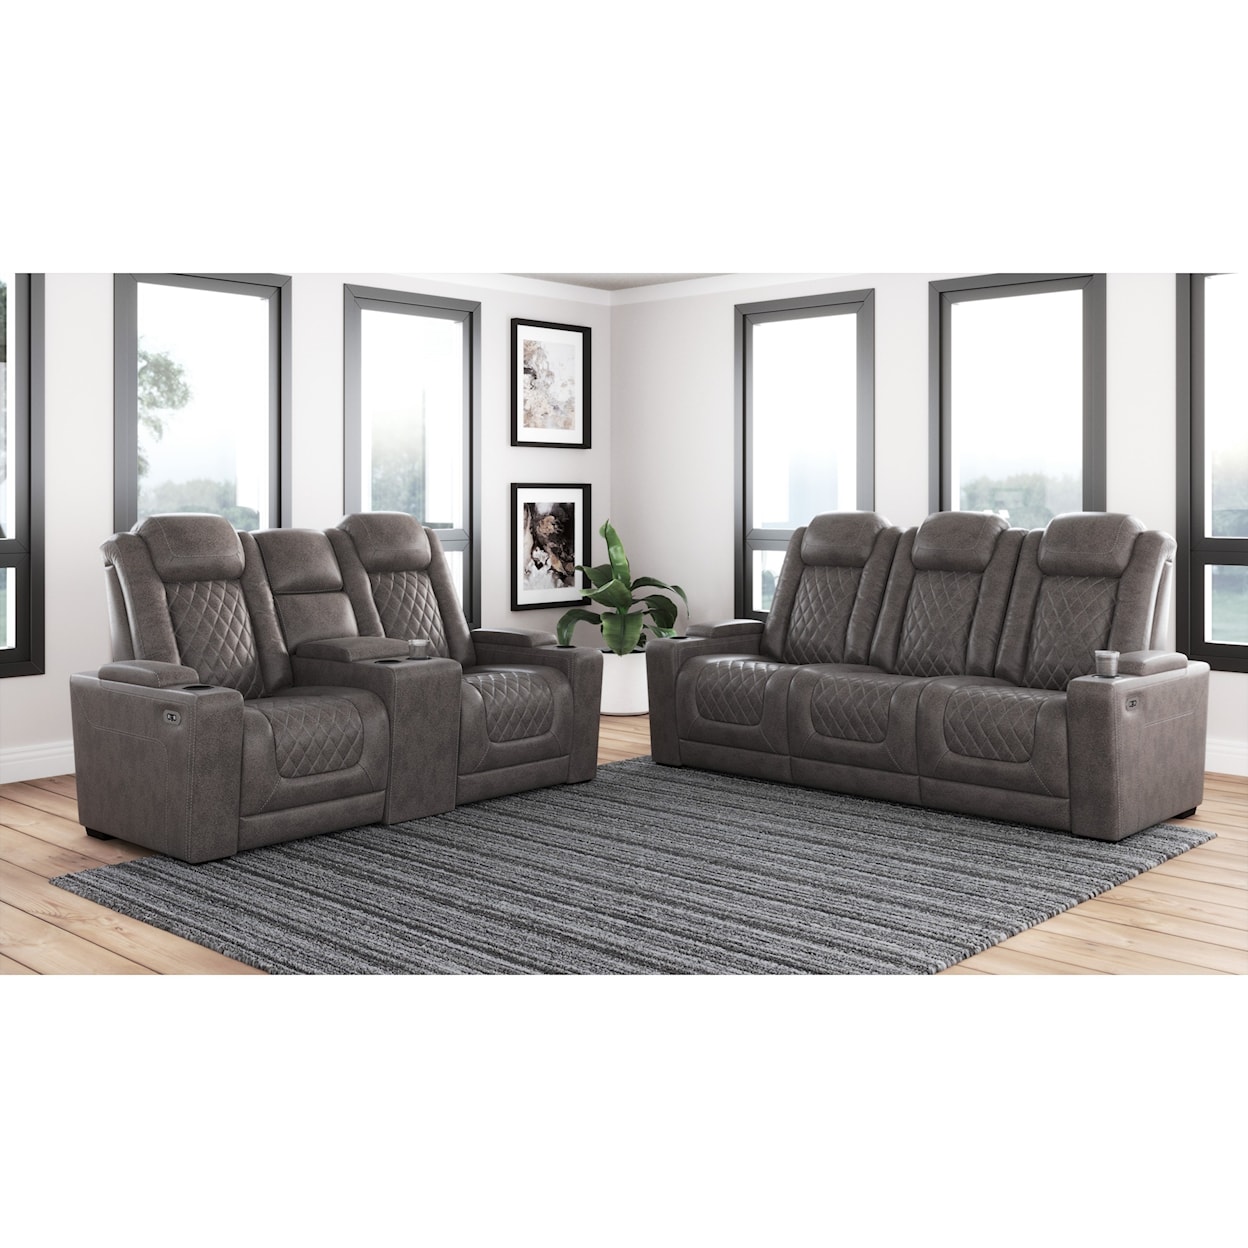 Michael Alan Select Hyllmont Power Reclining Living Room Group